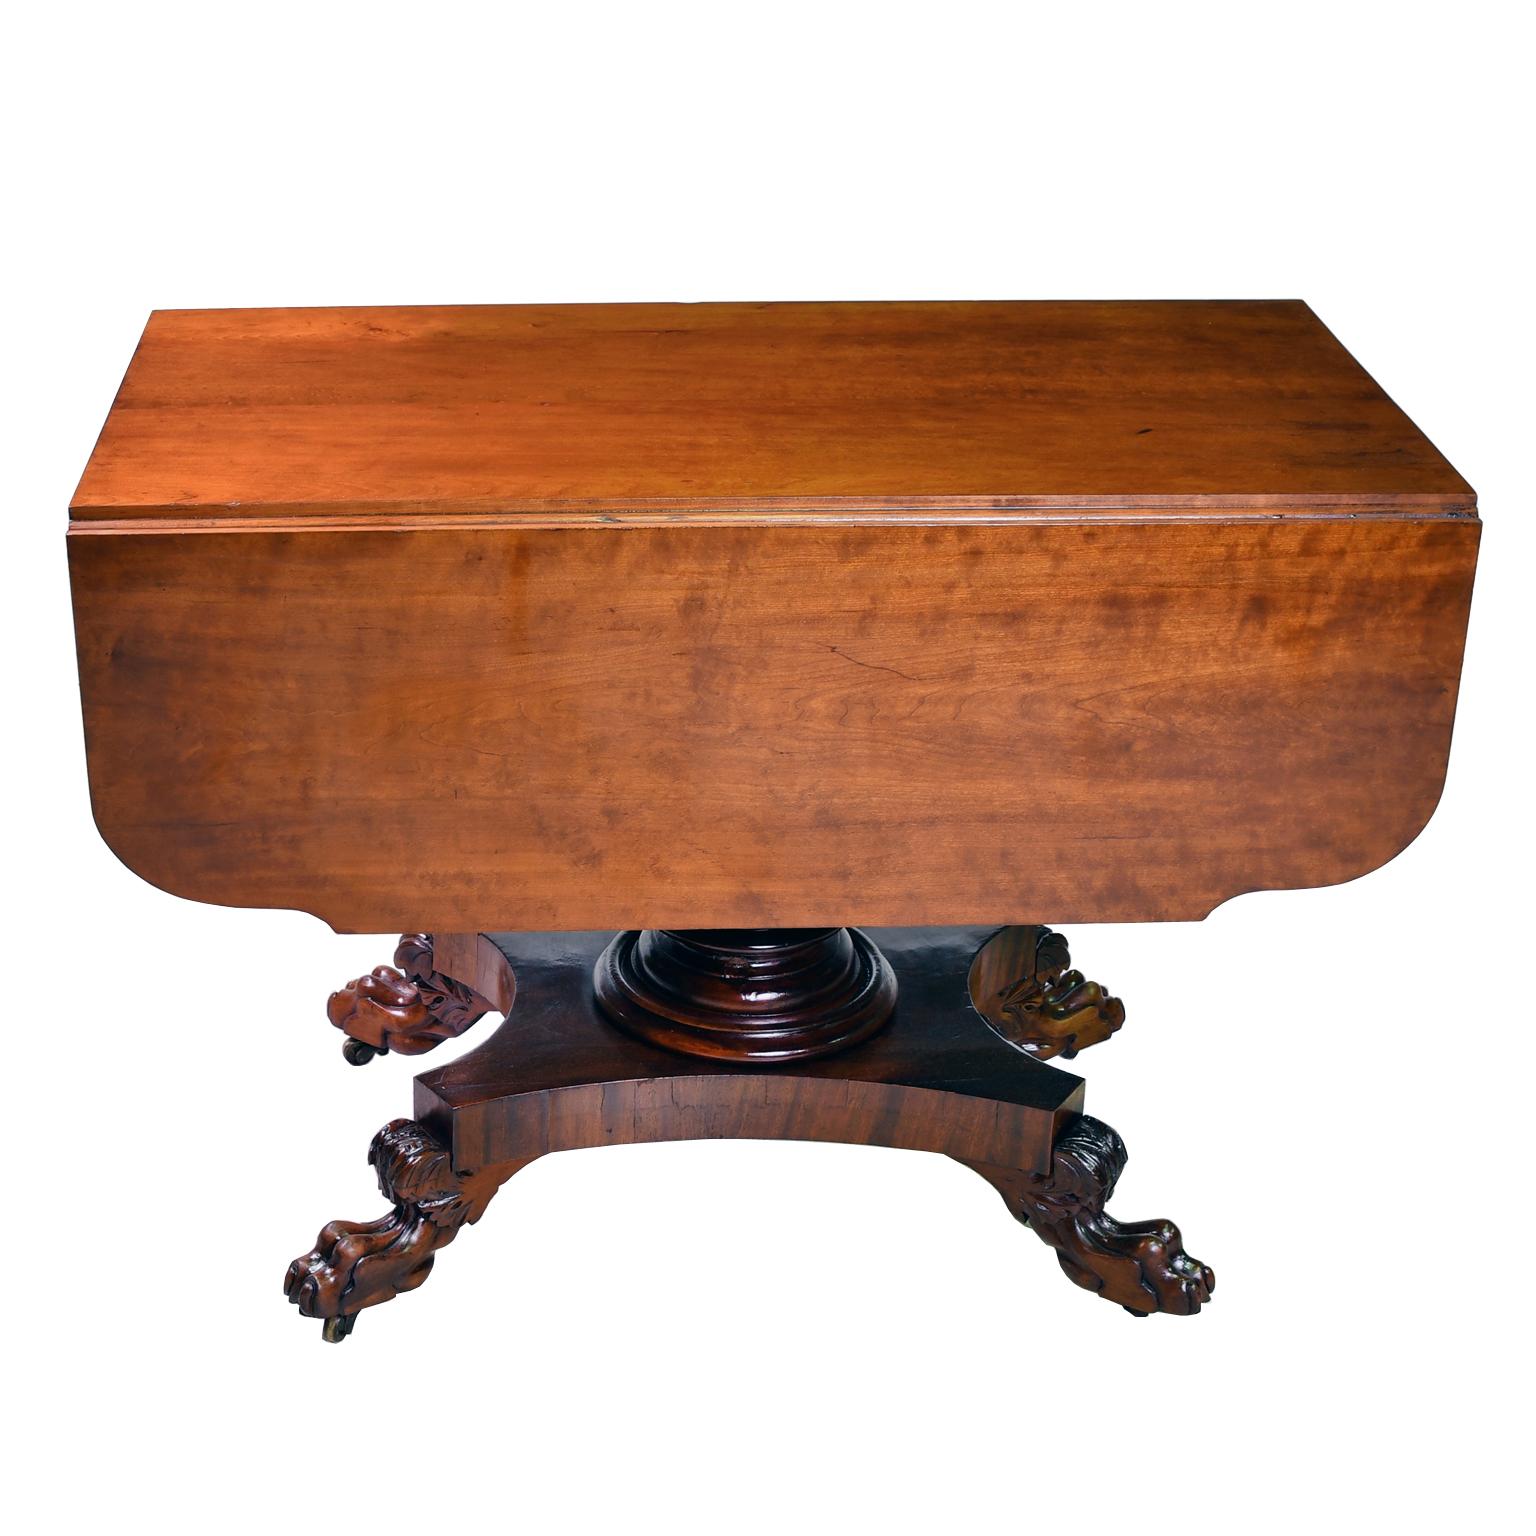 19th Century Early American Empire Drop-Leaf/ Pembroke Table in West Indies Mahogany, c. 1830 For Sale